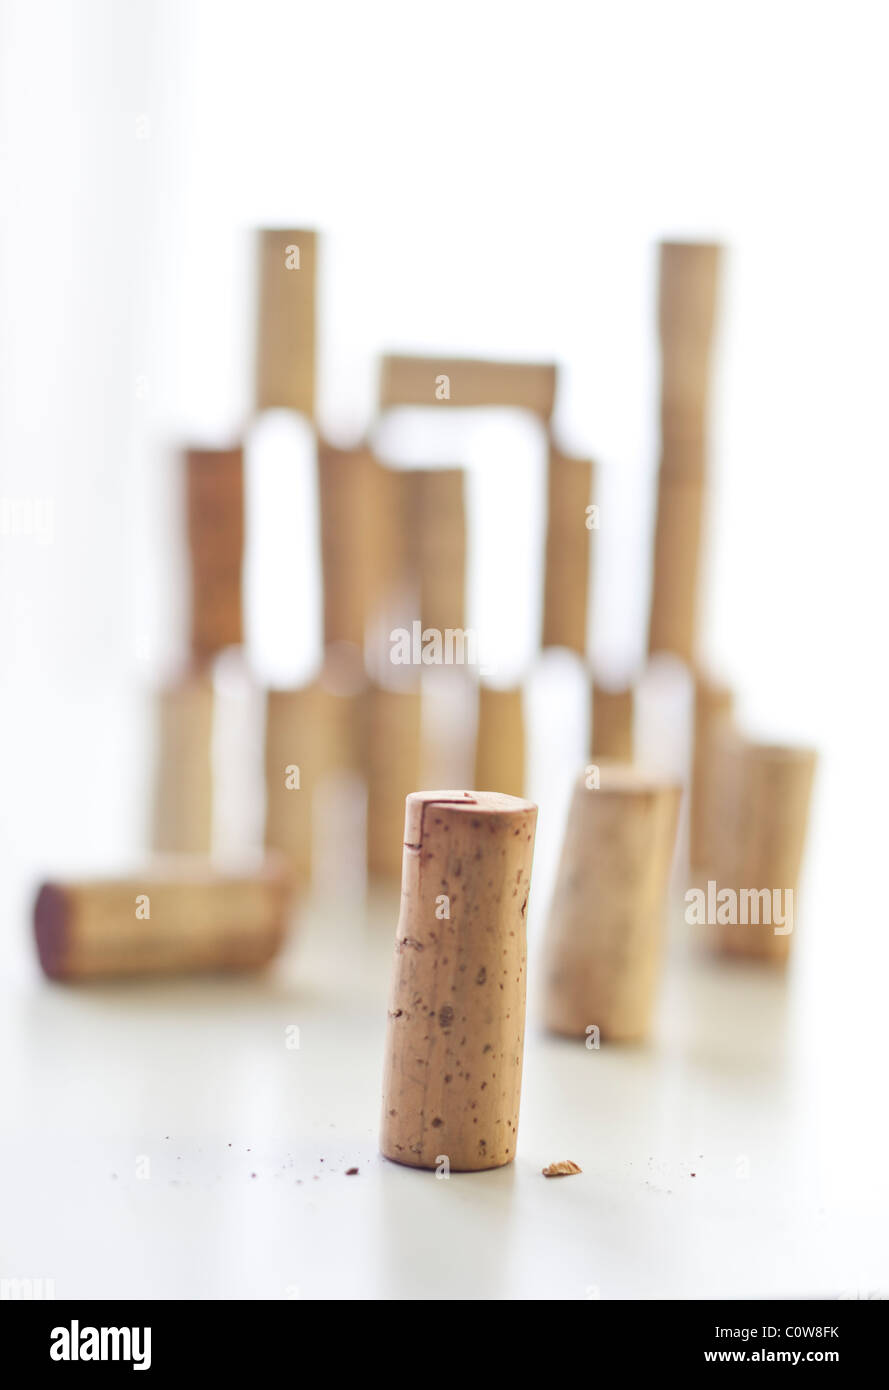 group of wine corks stacked , with one cork in focus in the foreground Stock Photo